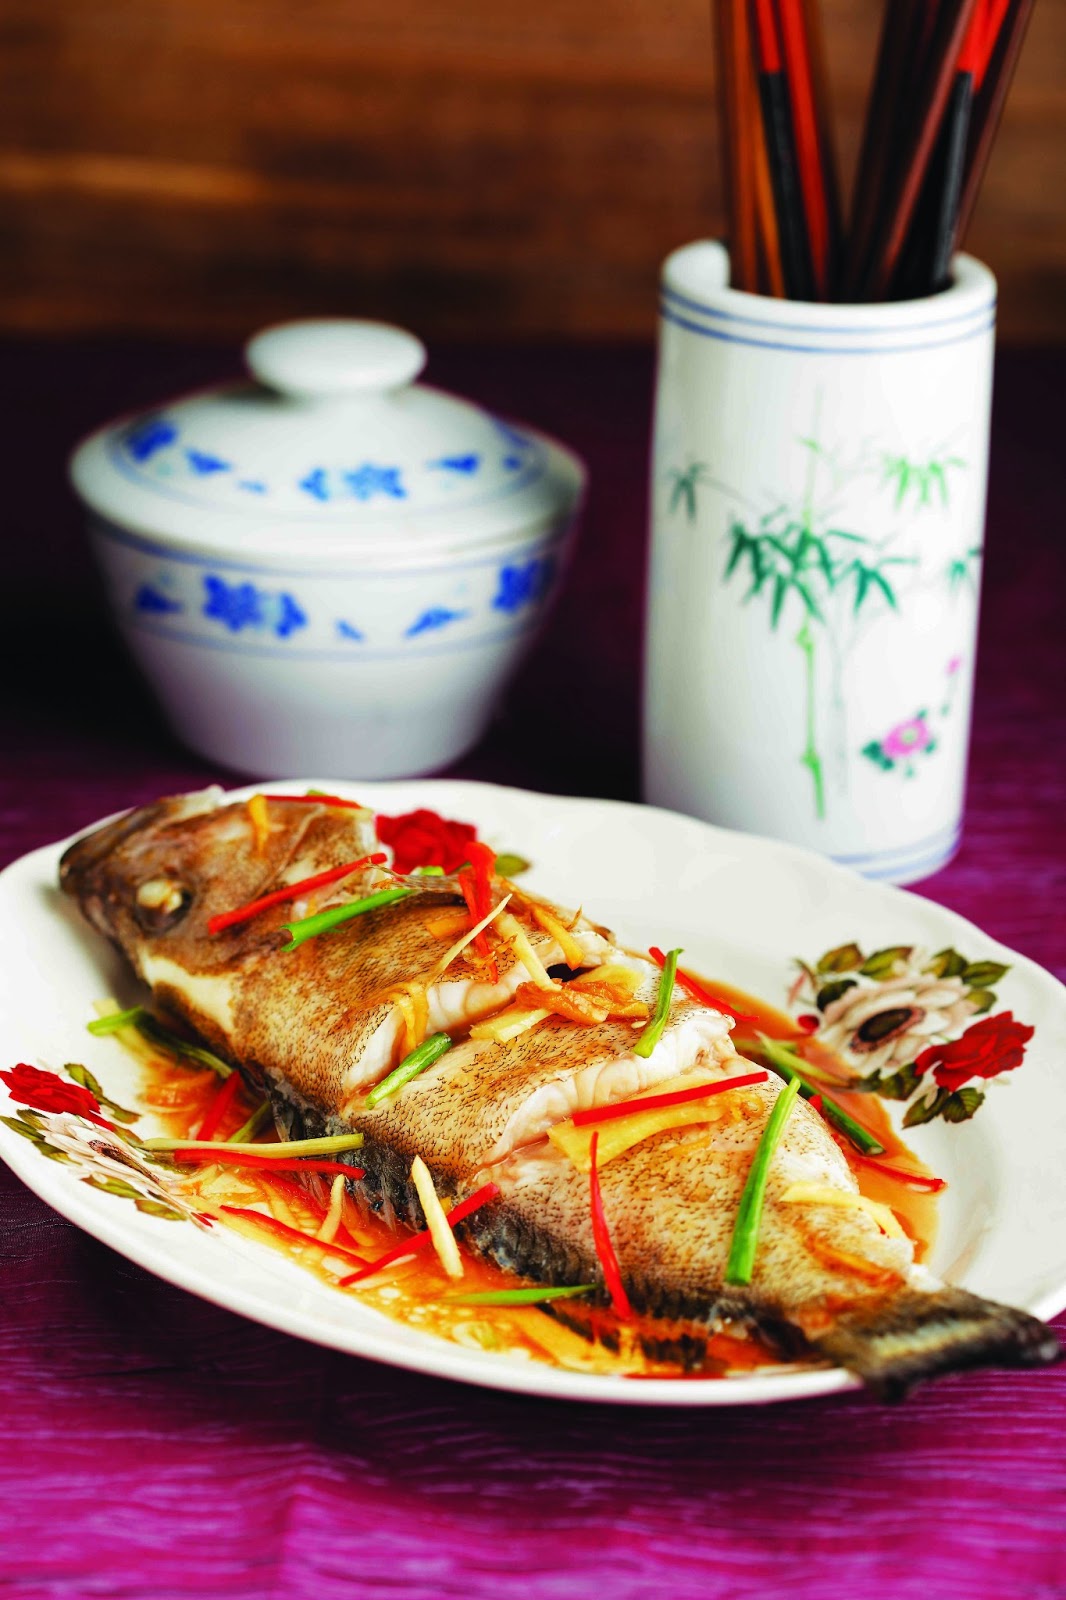 gastronommy.com: Chinese Steamed Whole Fish (Recipe)